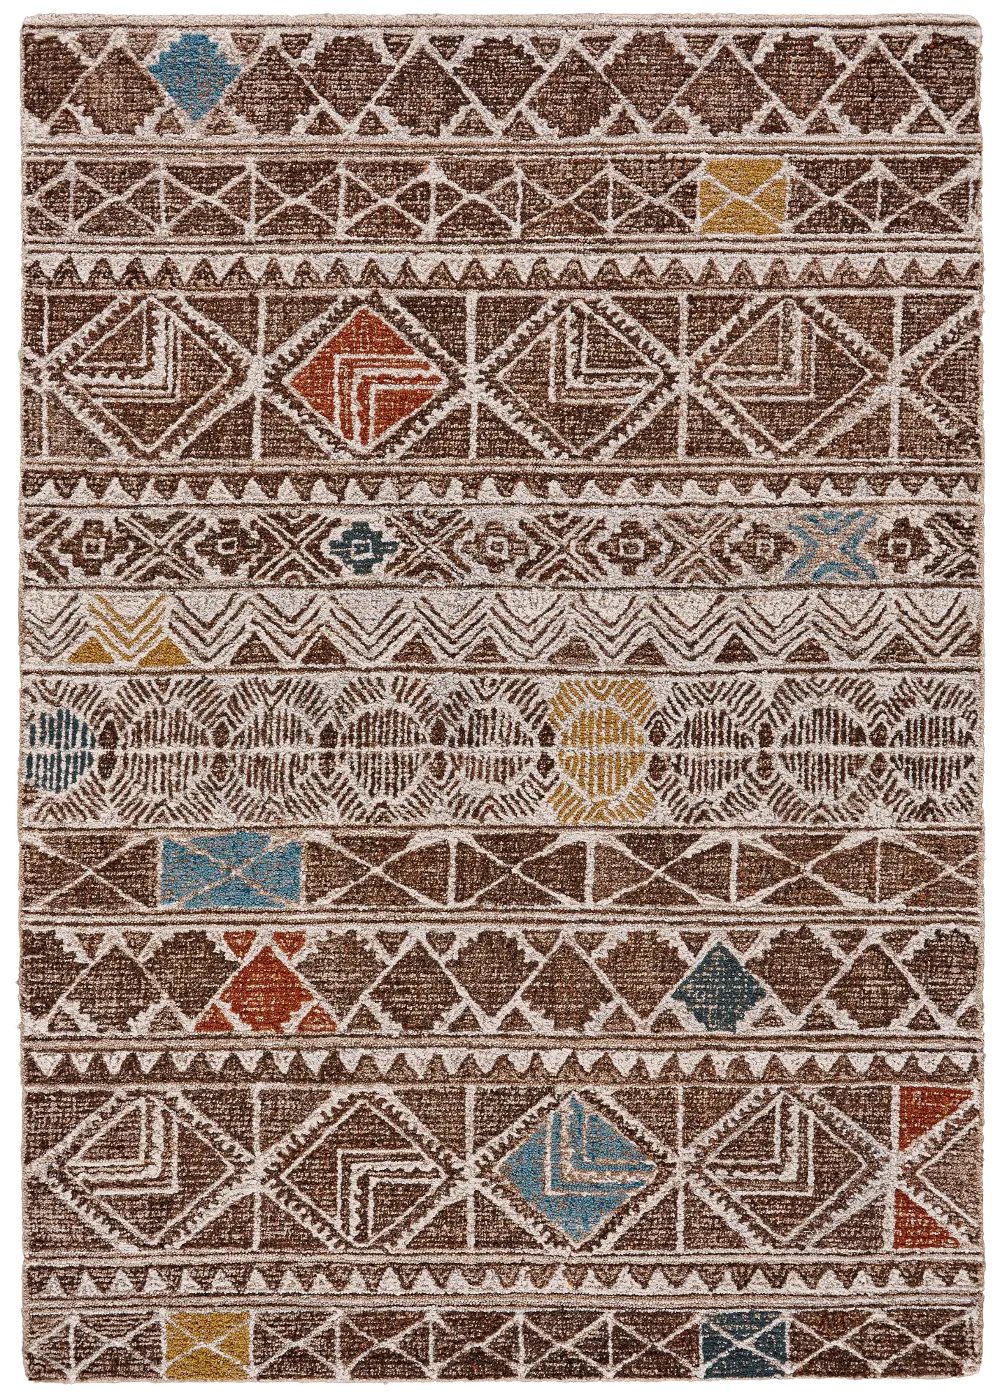 5 x 8 Medium Brown and Multi-Colored Area Rug - Turvey-1